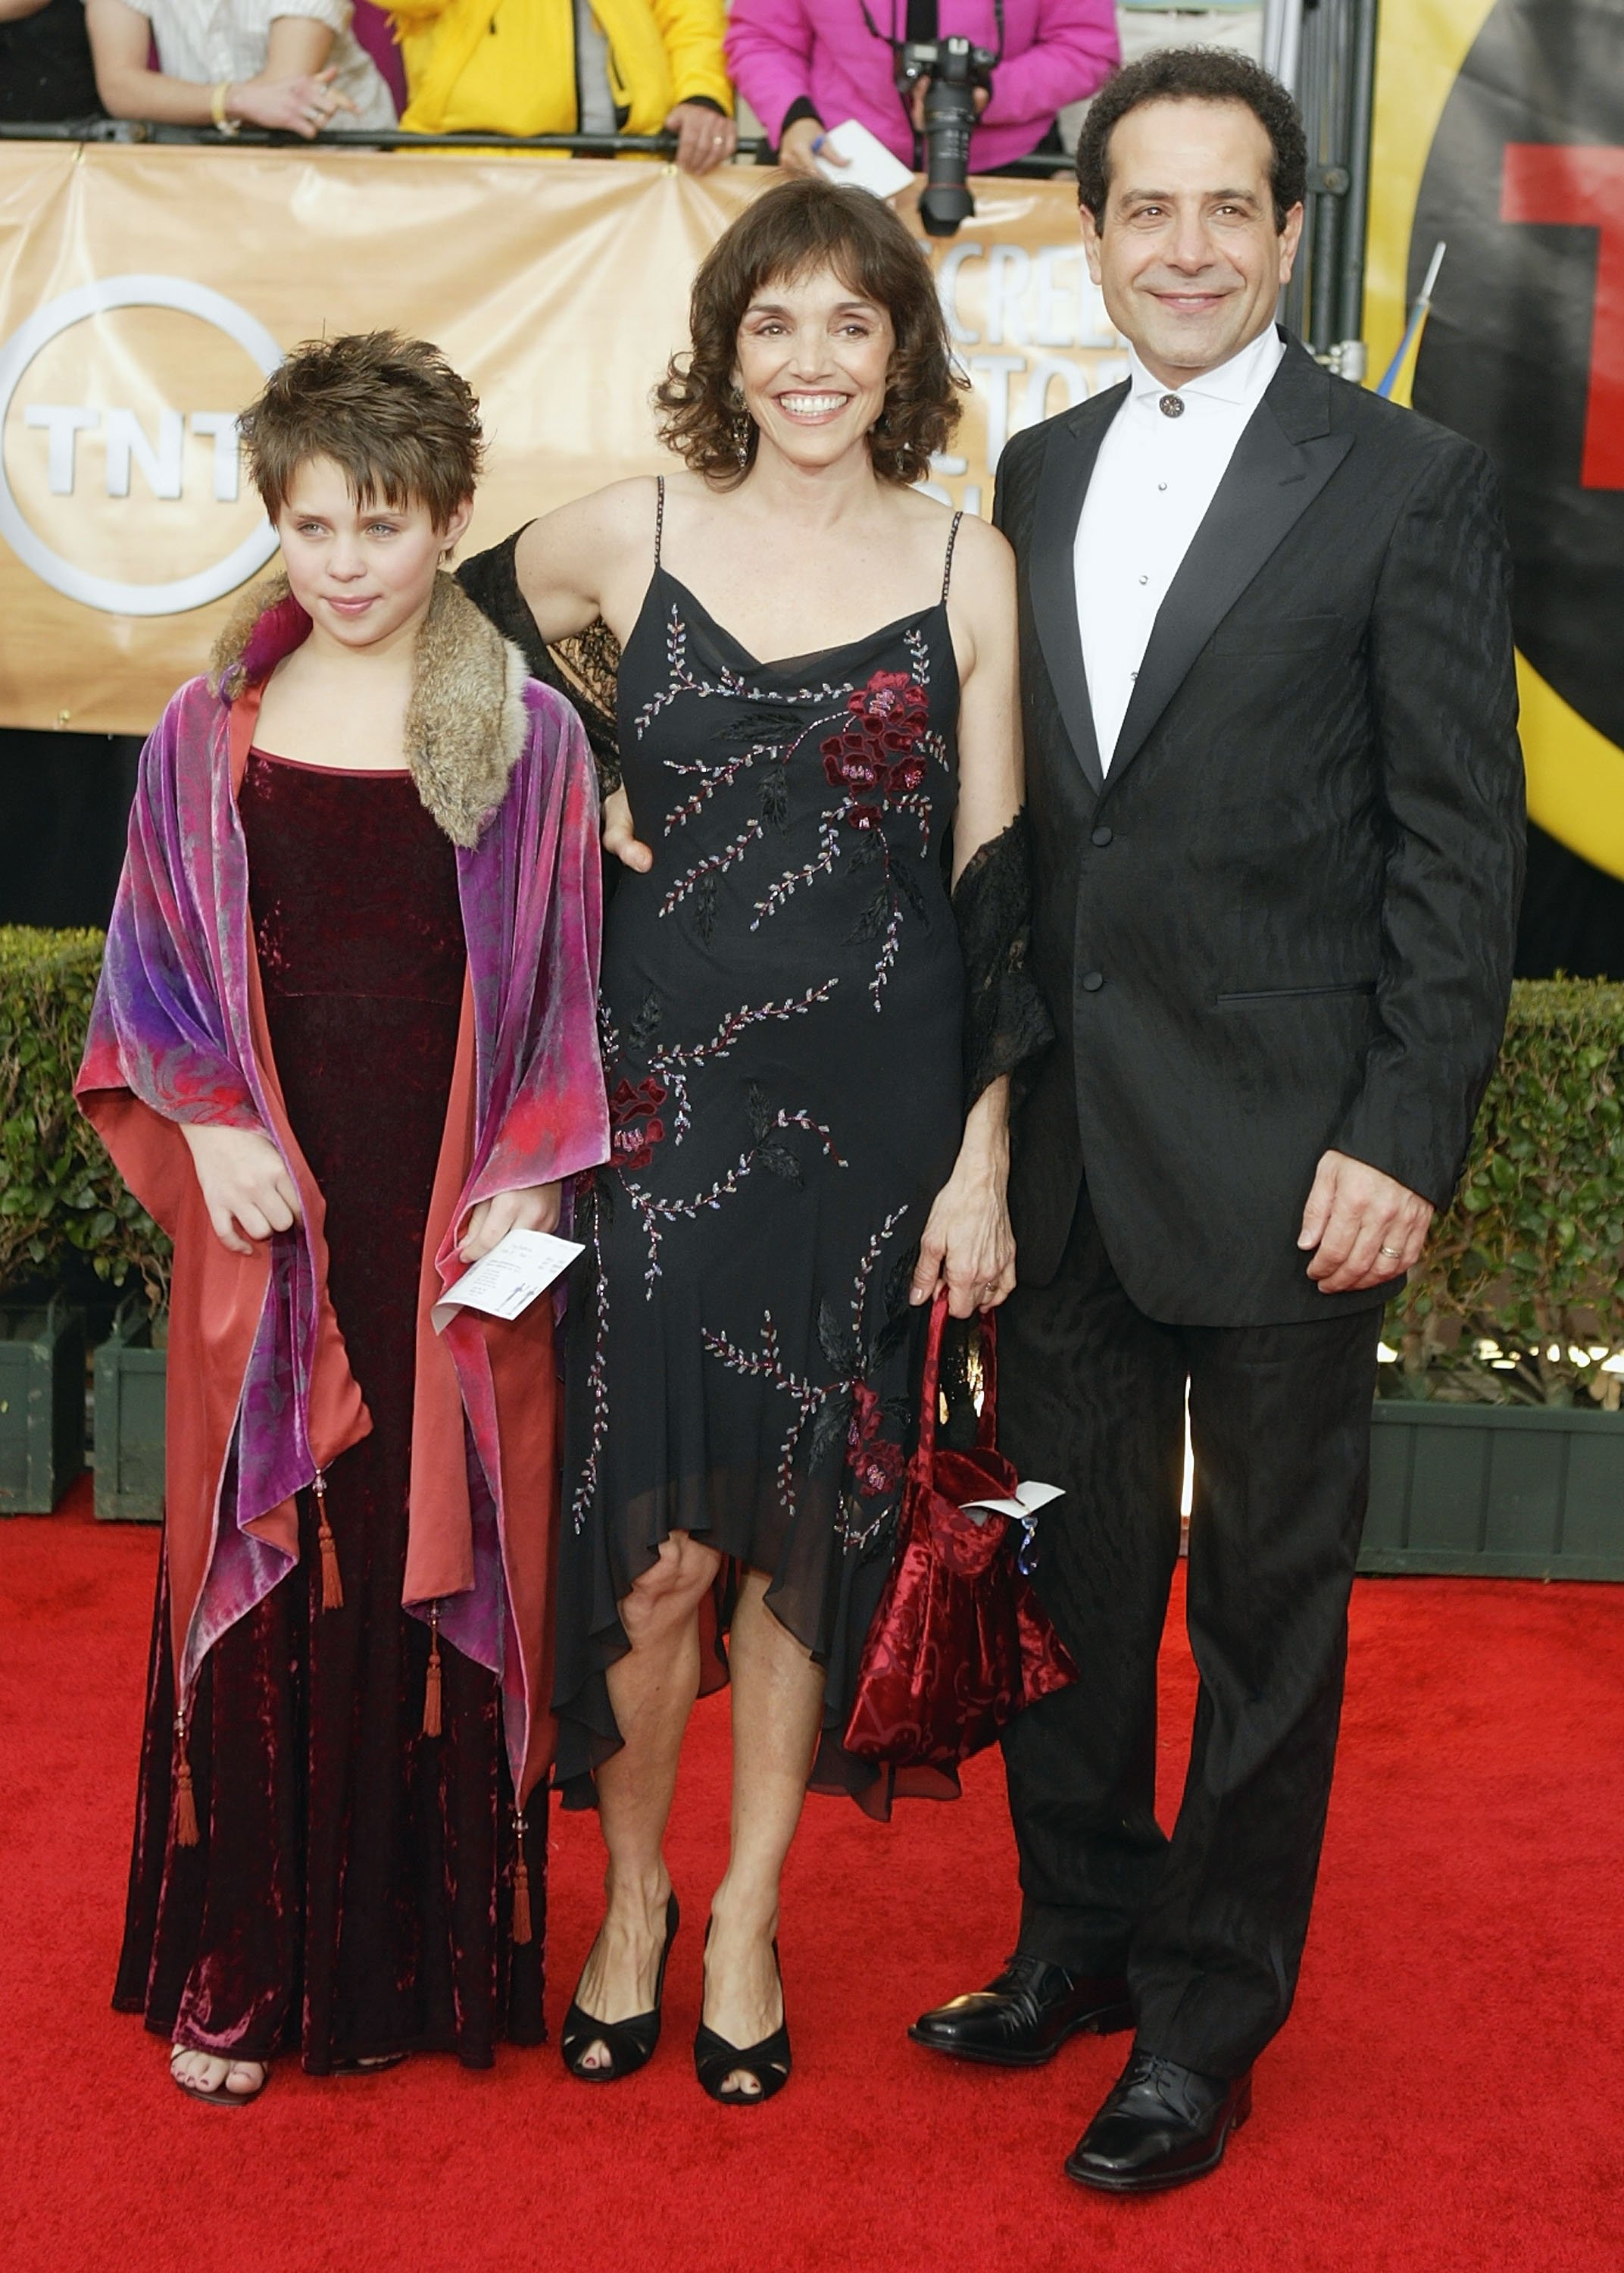 Tony Shalhoub with his wife Brooke Adams and their daughter Sophie attend the 10th Annual Screen Actors Guild Awards at the Shrine Auditorium on February 22, 2004 in Los Angeles, California. Photo: Getty Images